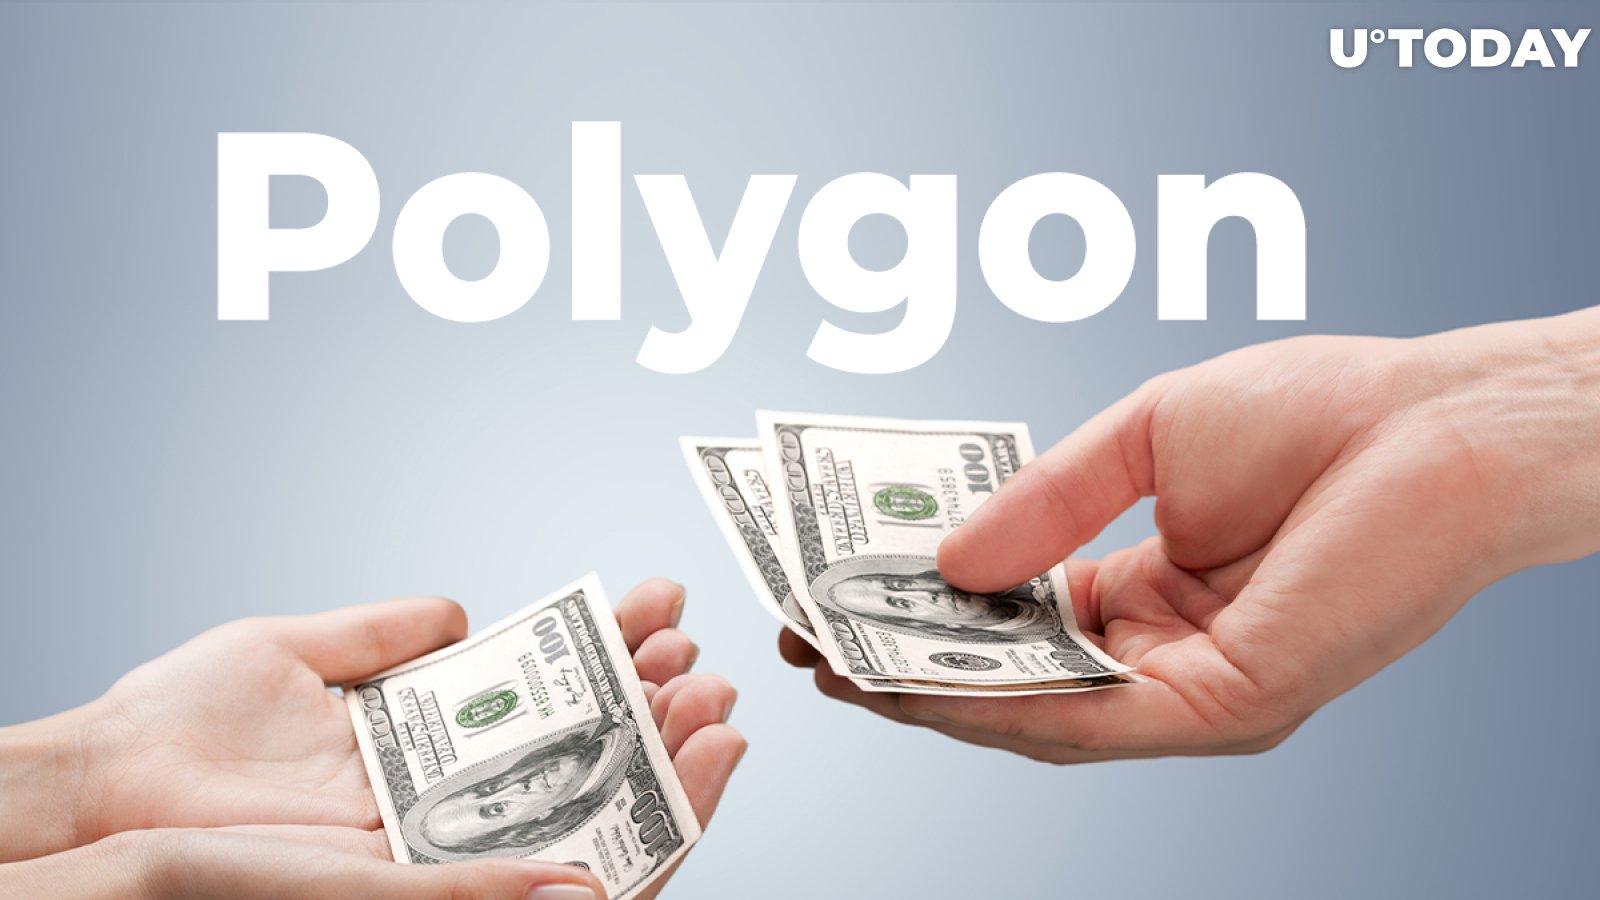 With $850 Million at Risk, Polygon (MATIC) Paid Largest Bug Bounty in History